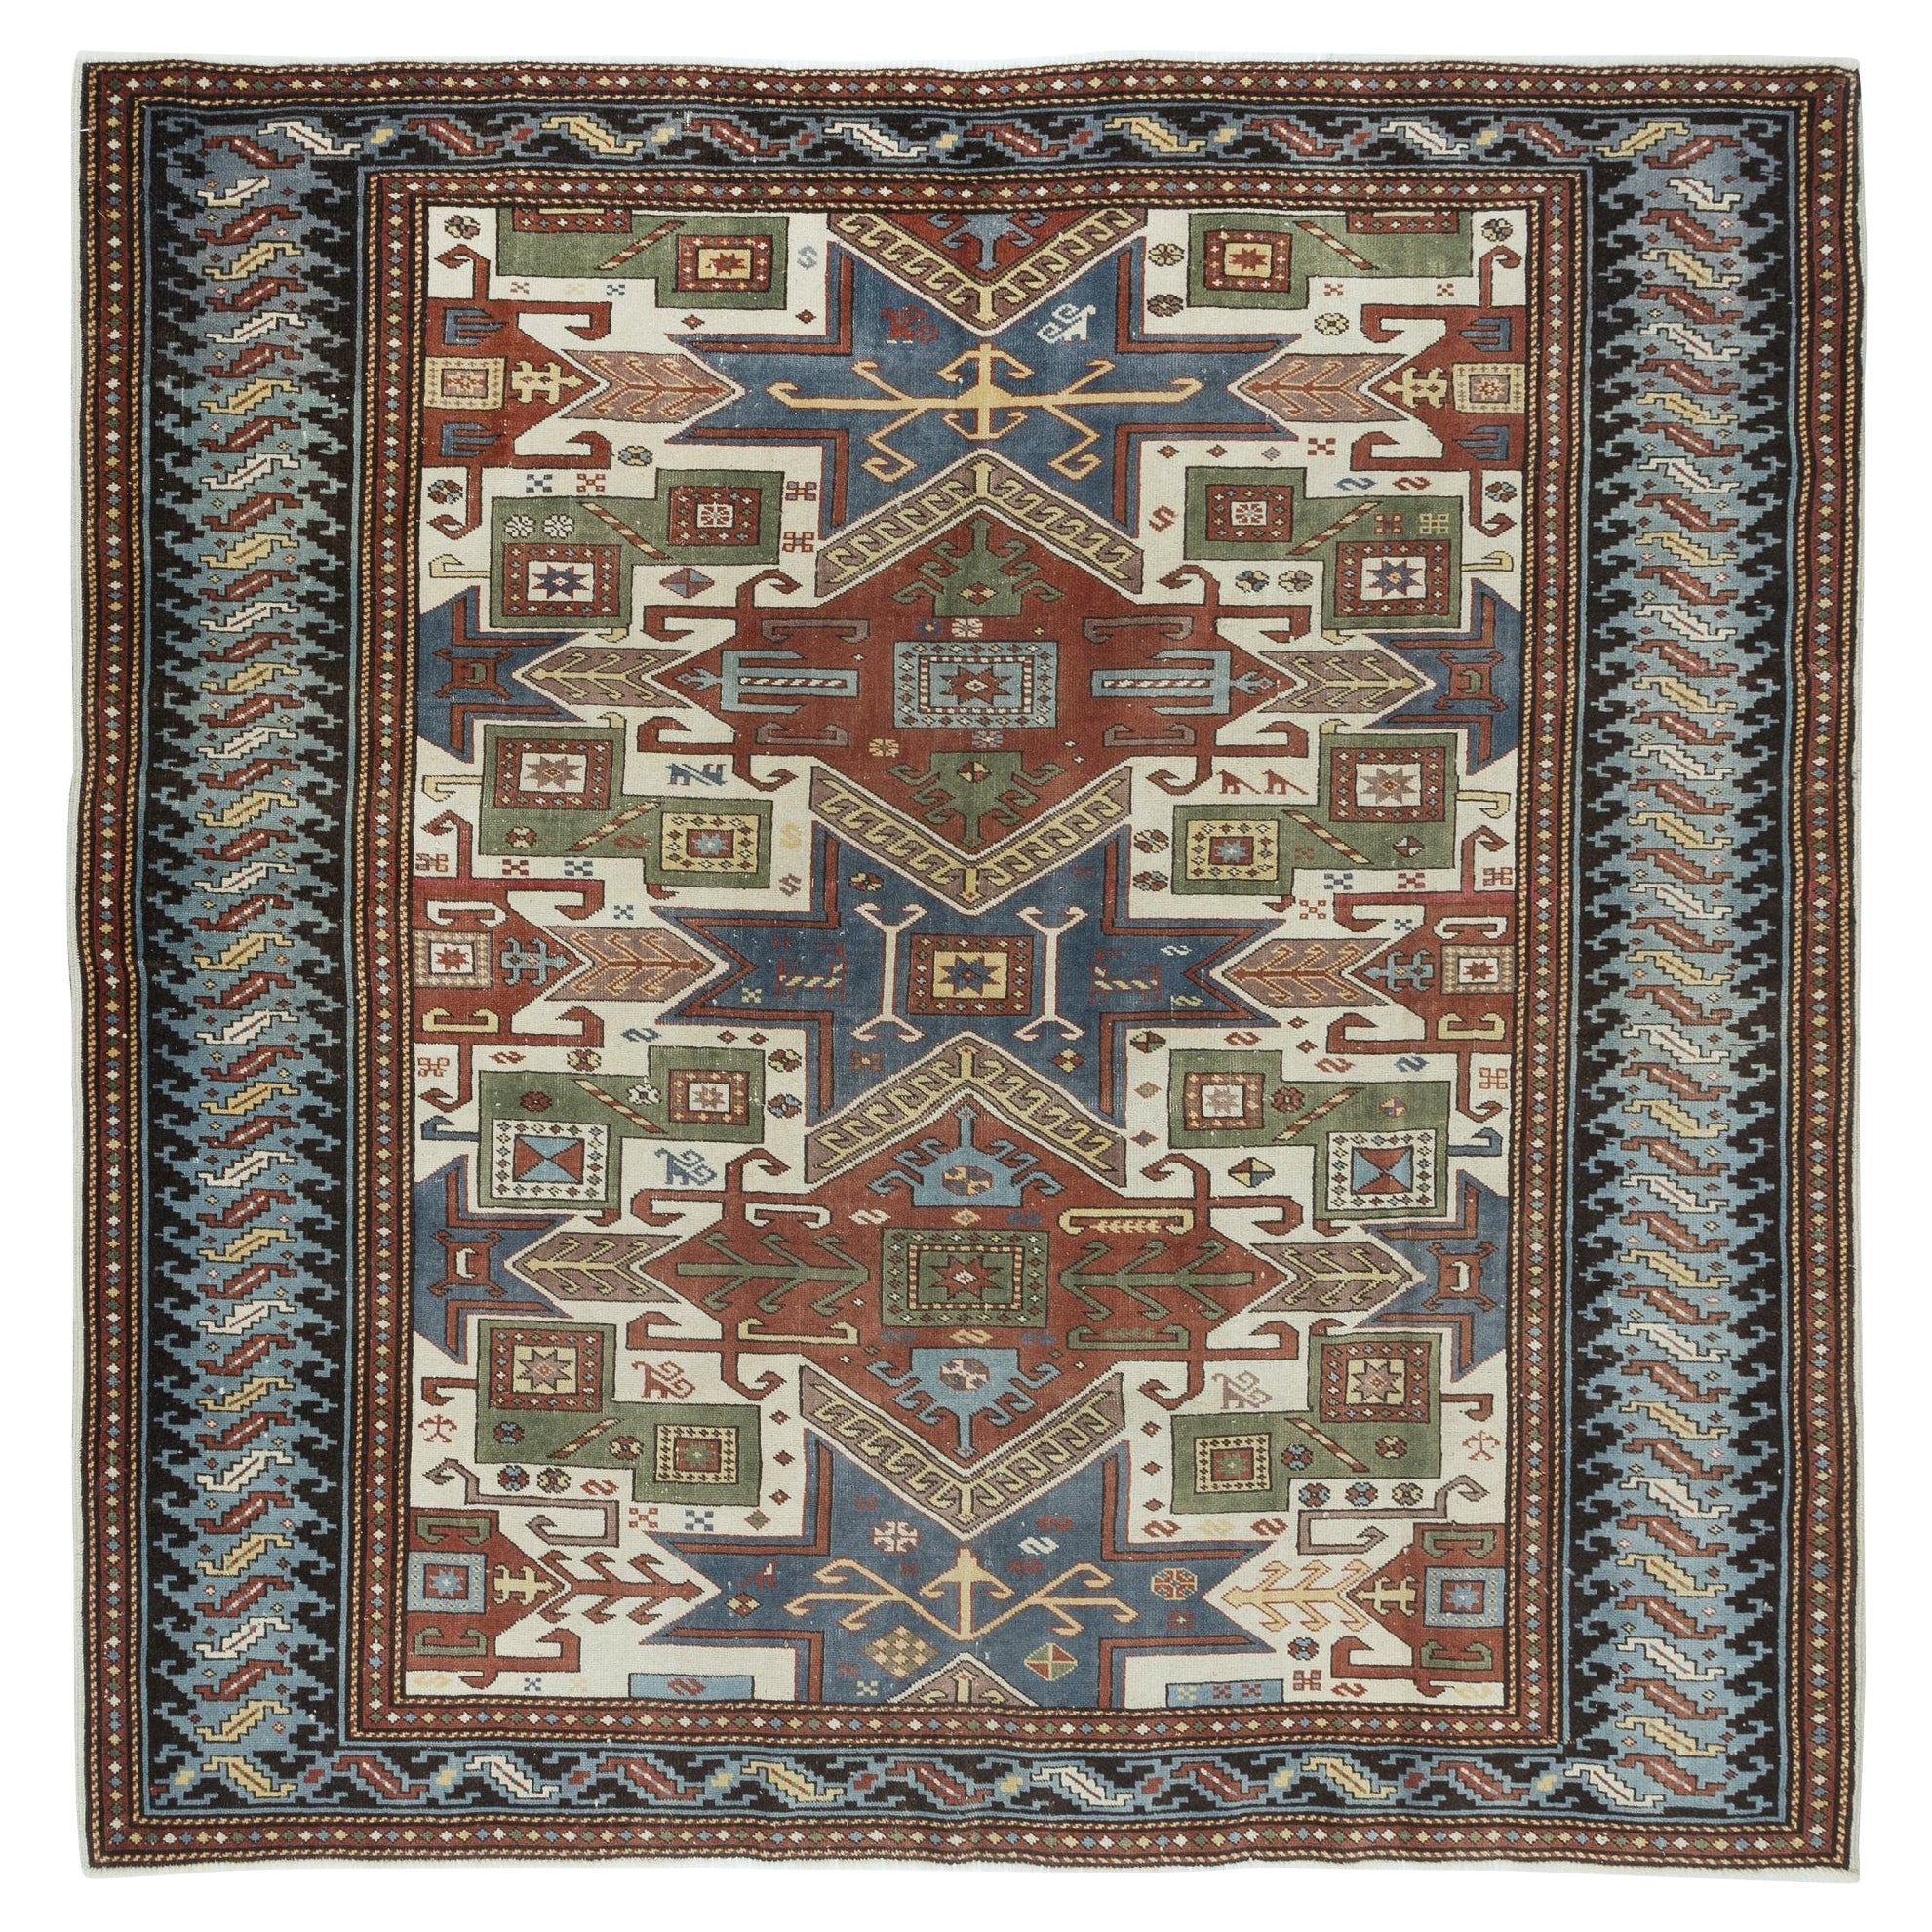 6.3x6.3 Ft Unique Vintage Hand Knotted Turkish Square Rug with Geometric Patters For Sale